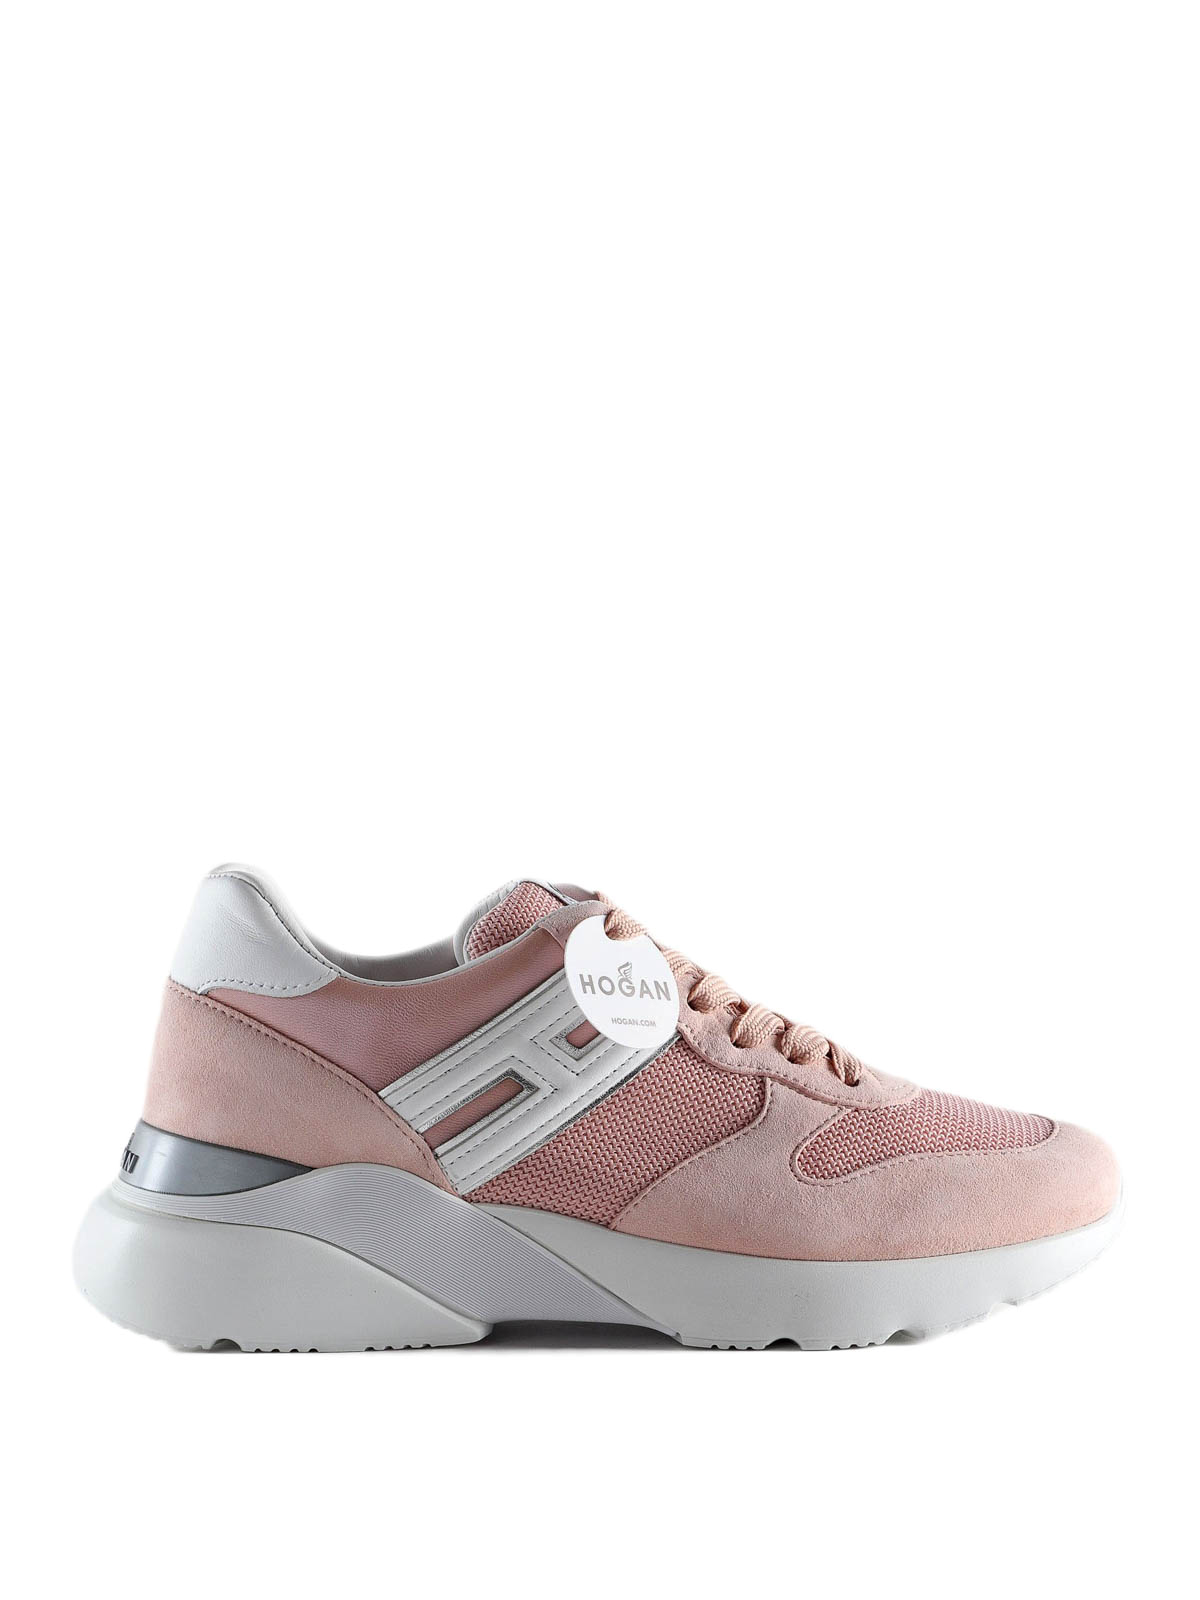 Hogan - Sneaker Active one rosa e bianche in camoscio - sneakers -  HXW3850BF50KX101GY